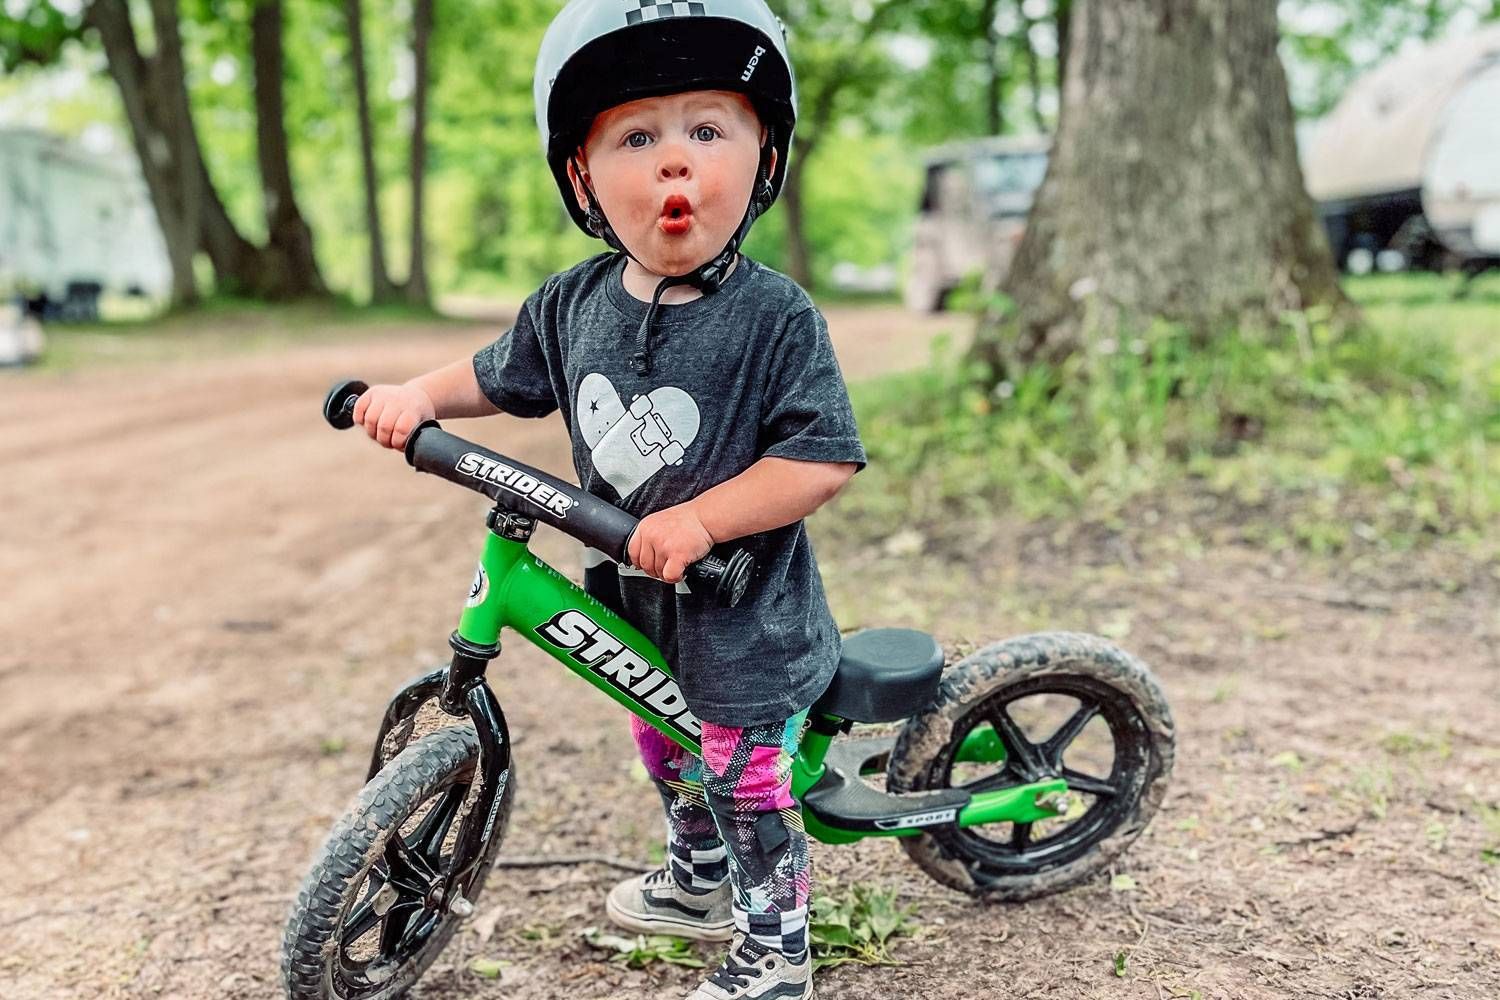 A toddler takes a break from riding a green Strider balance bike